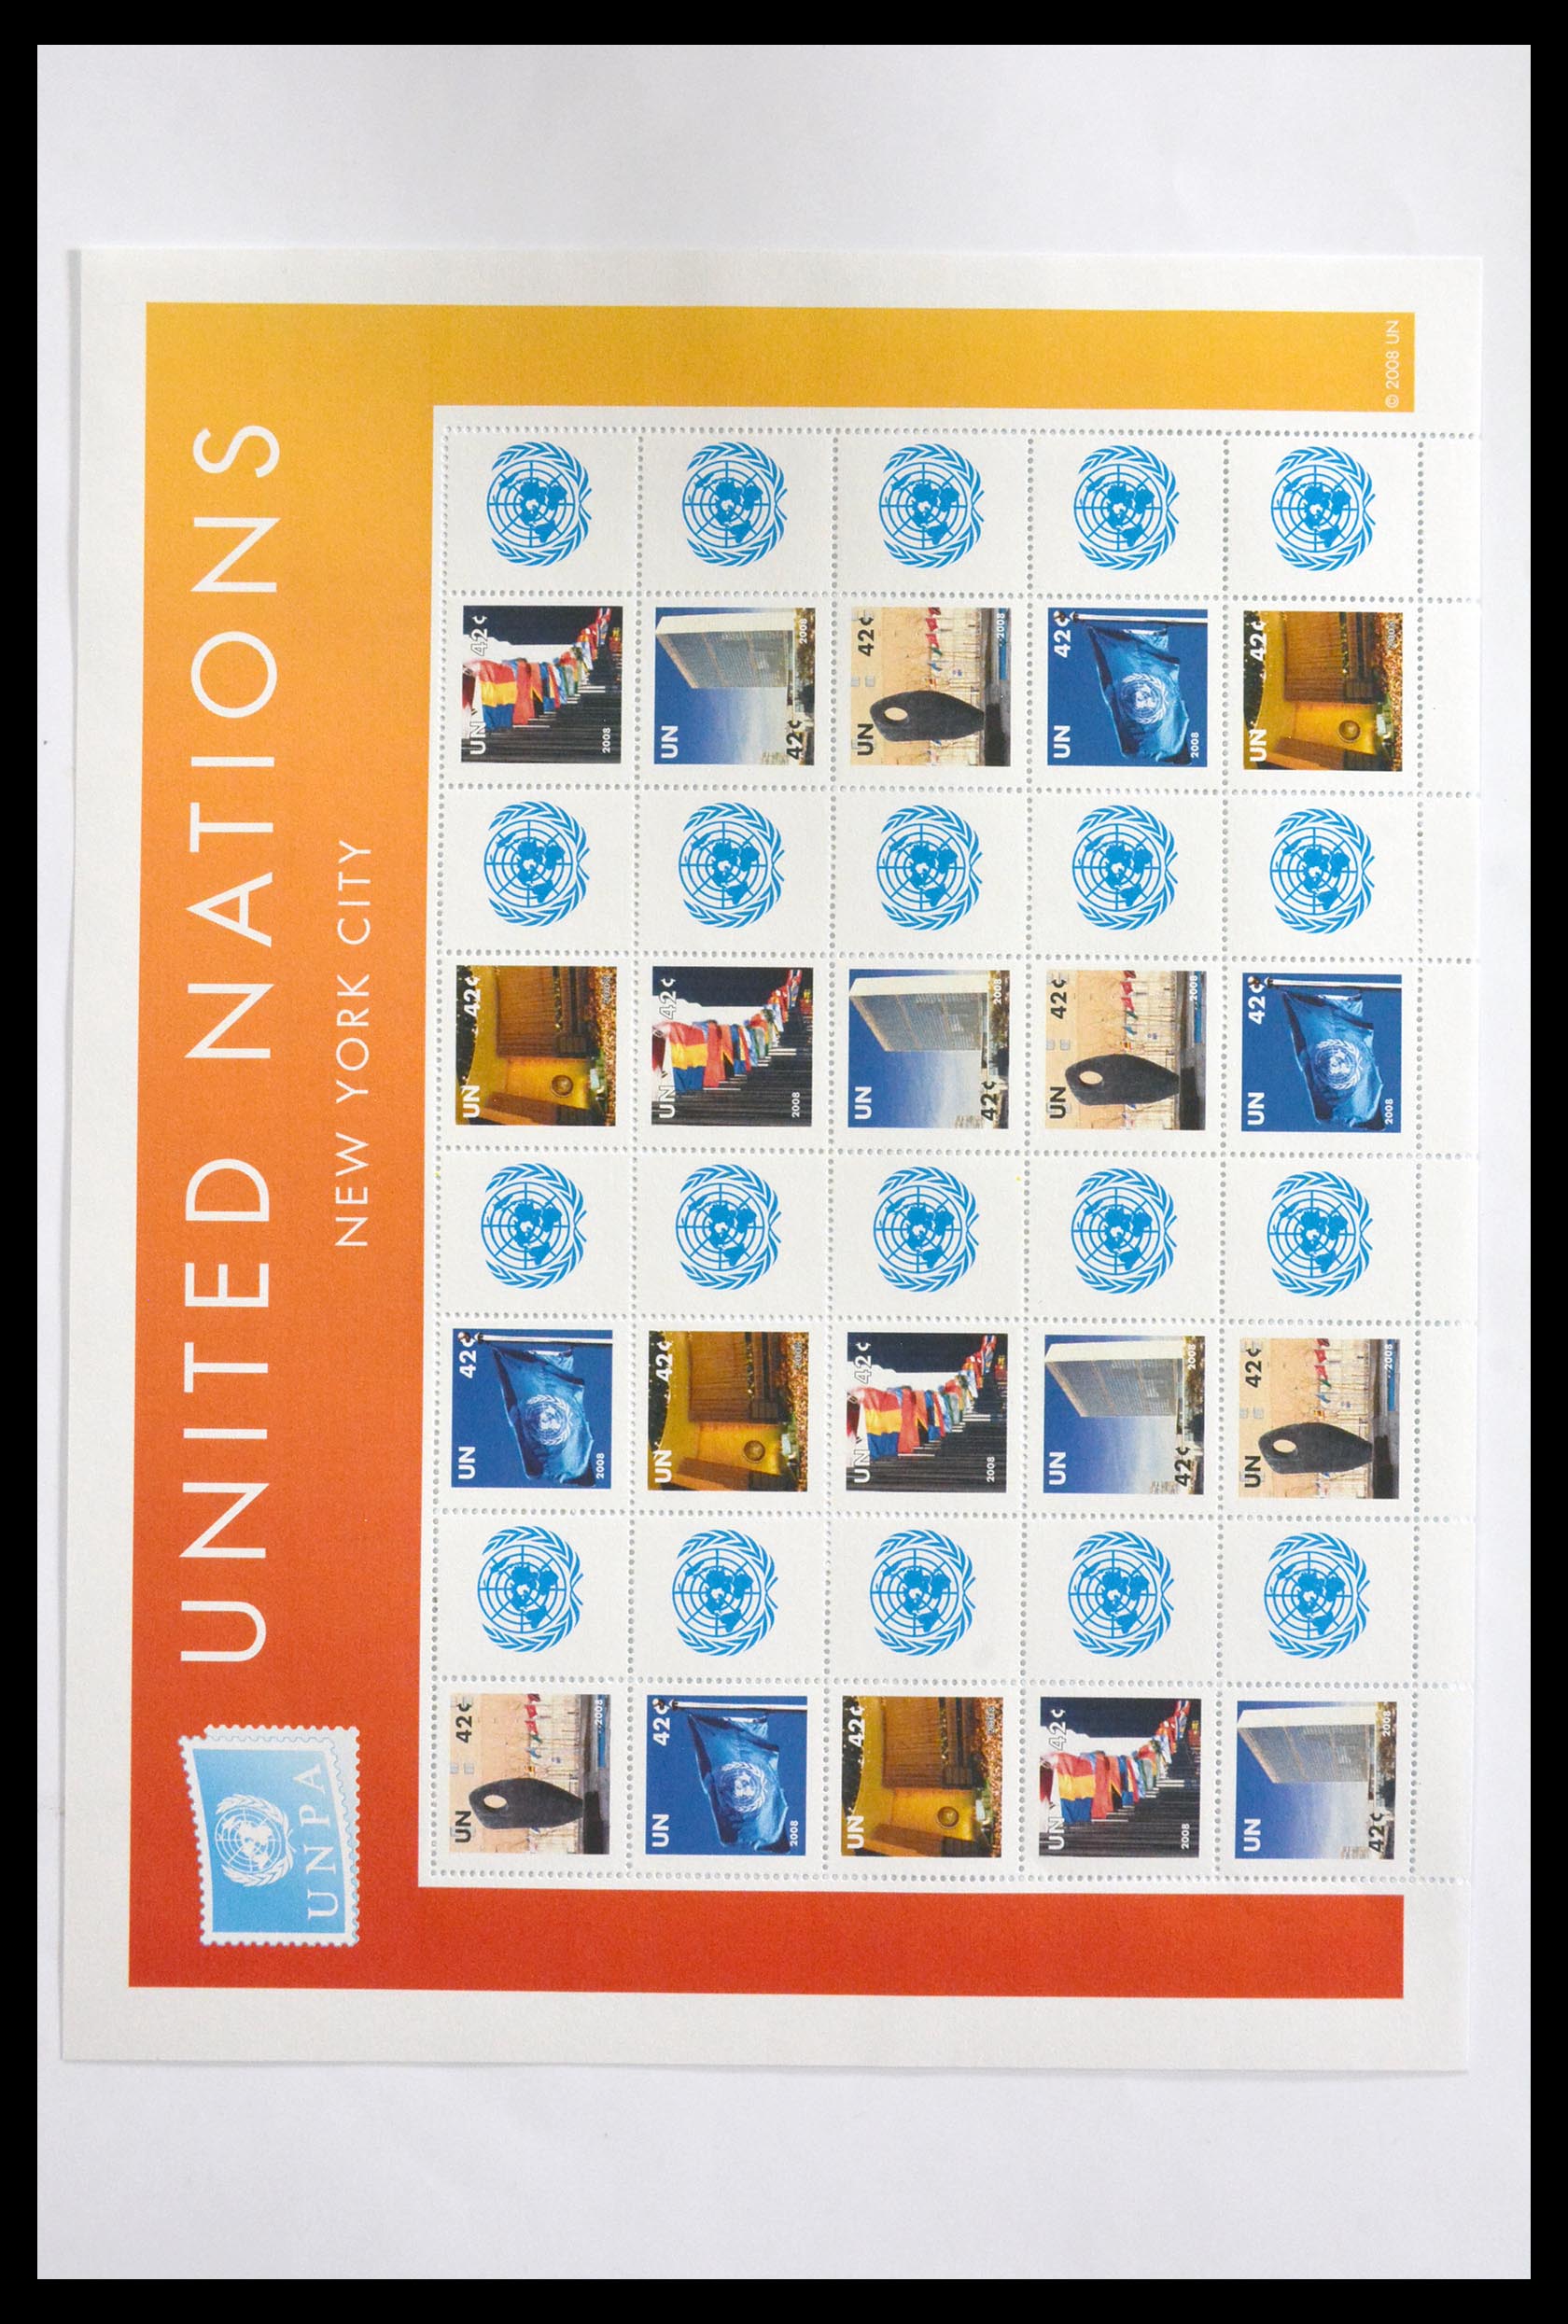 29721 018 - 29721 United Nations personalised sheets 2003-2010.